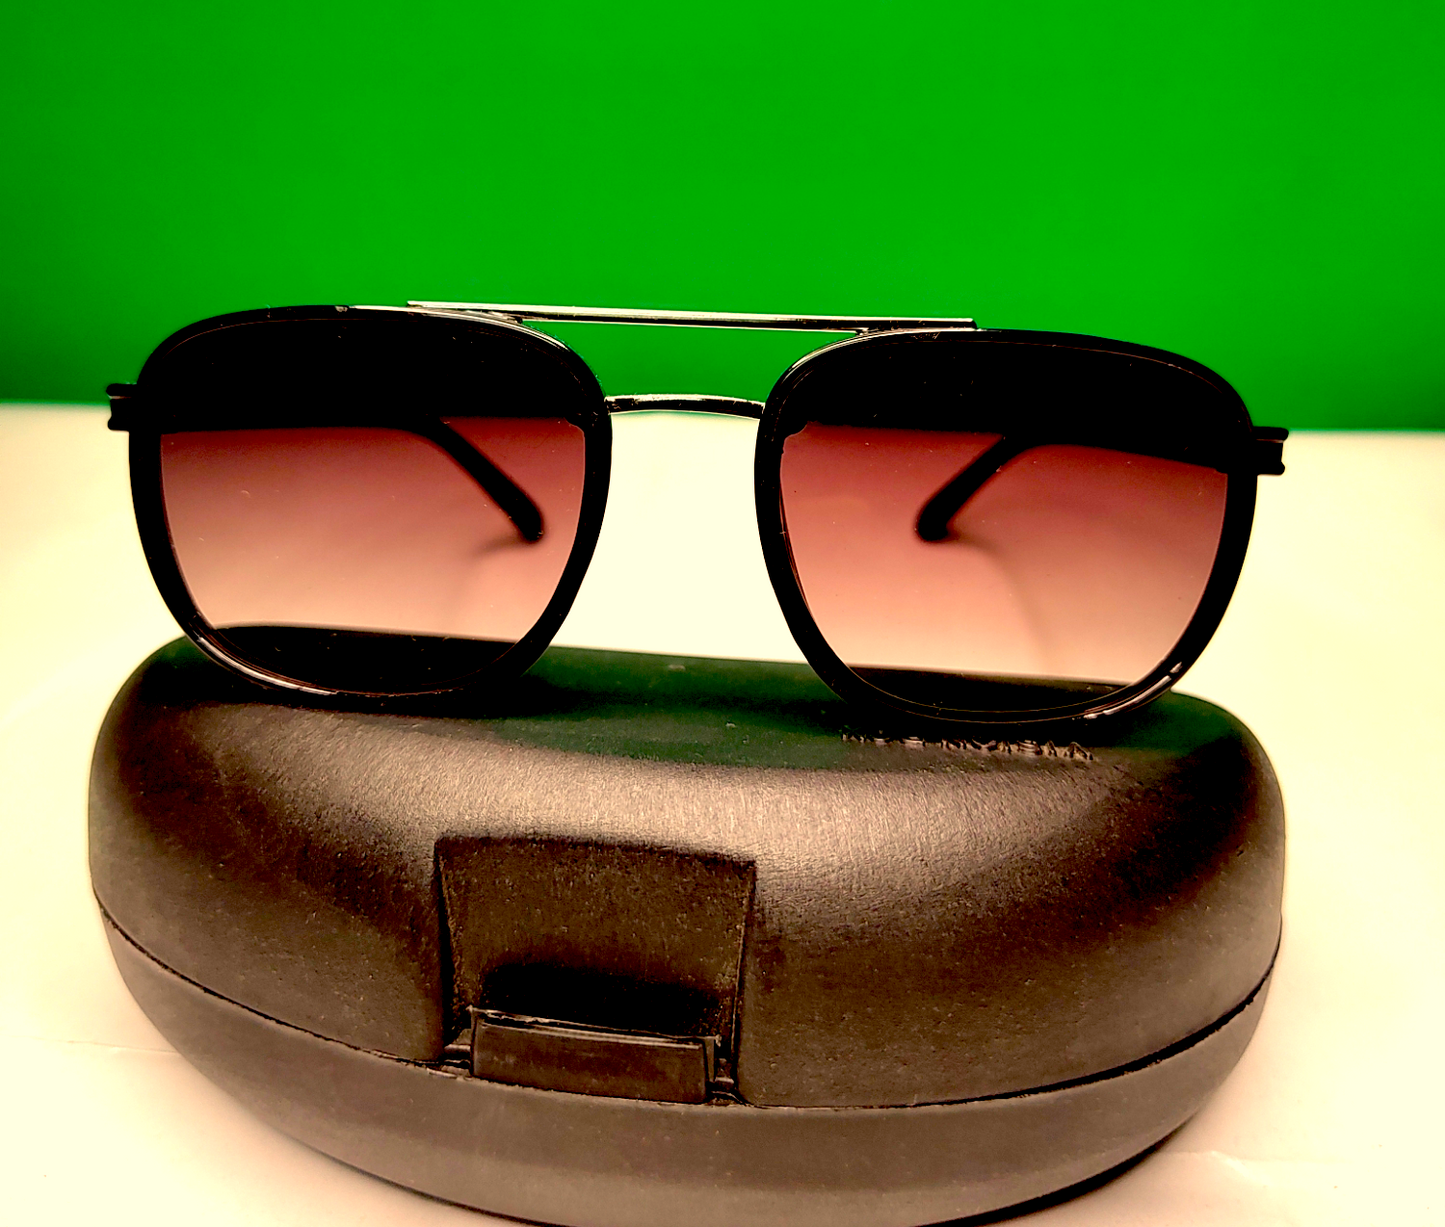 Square sunglass with metal frame